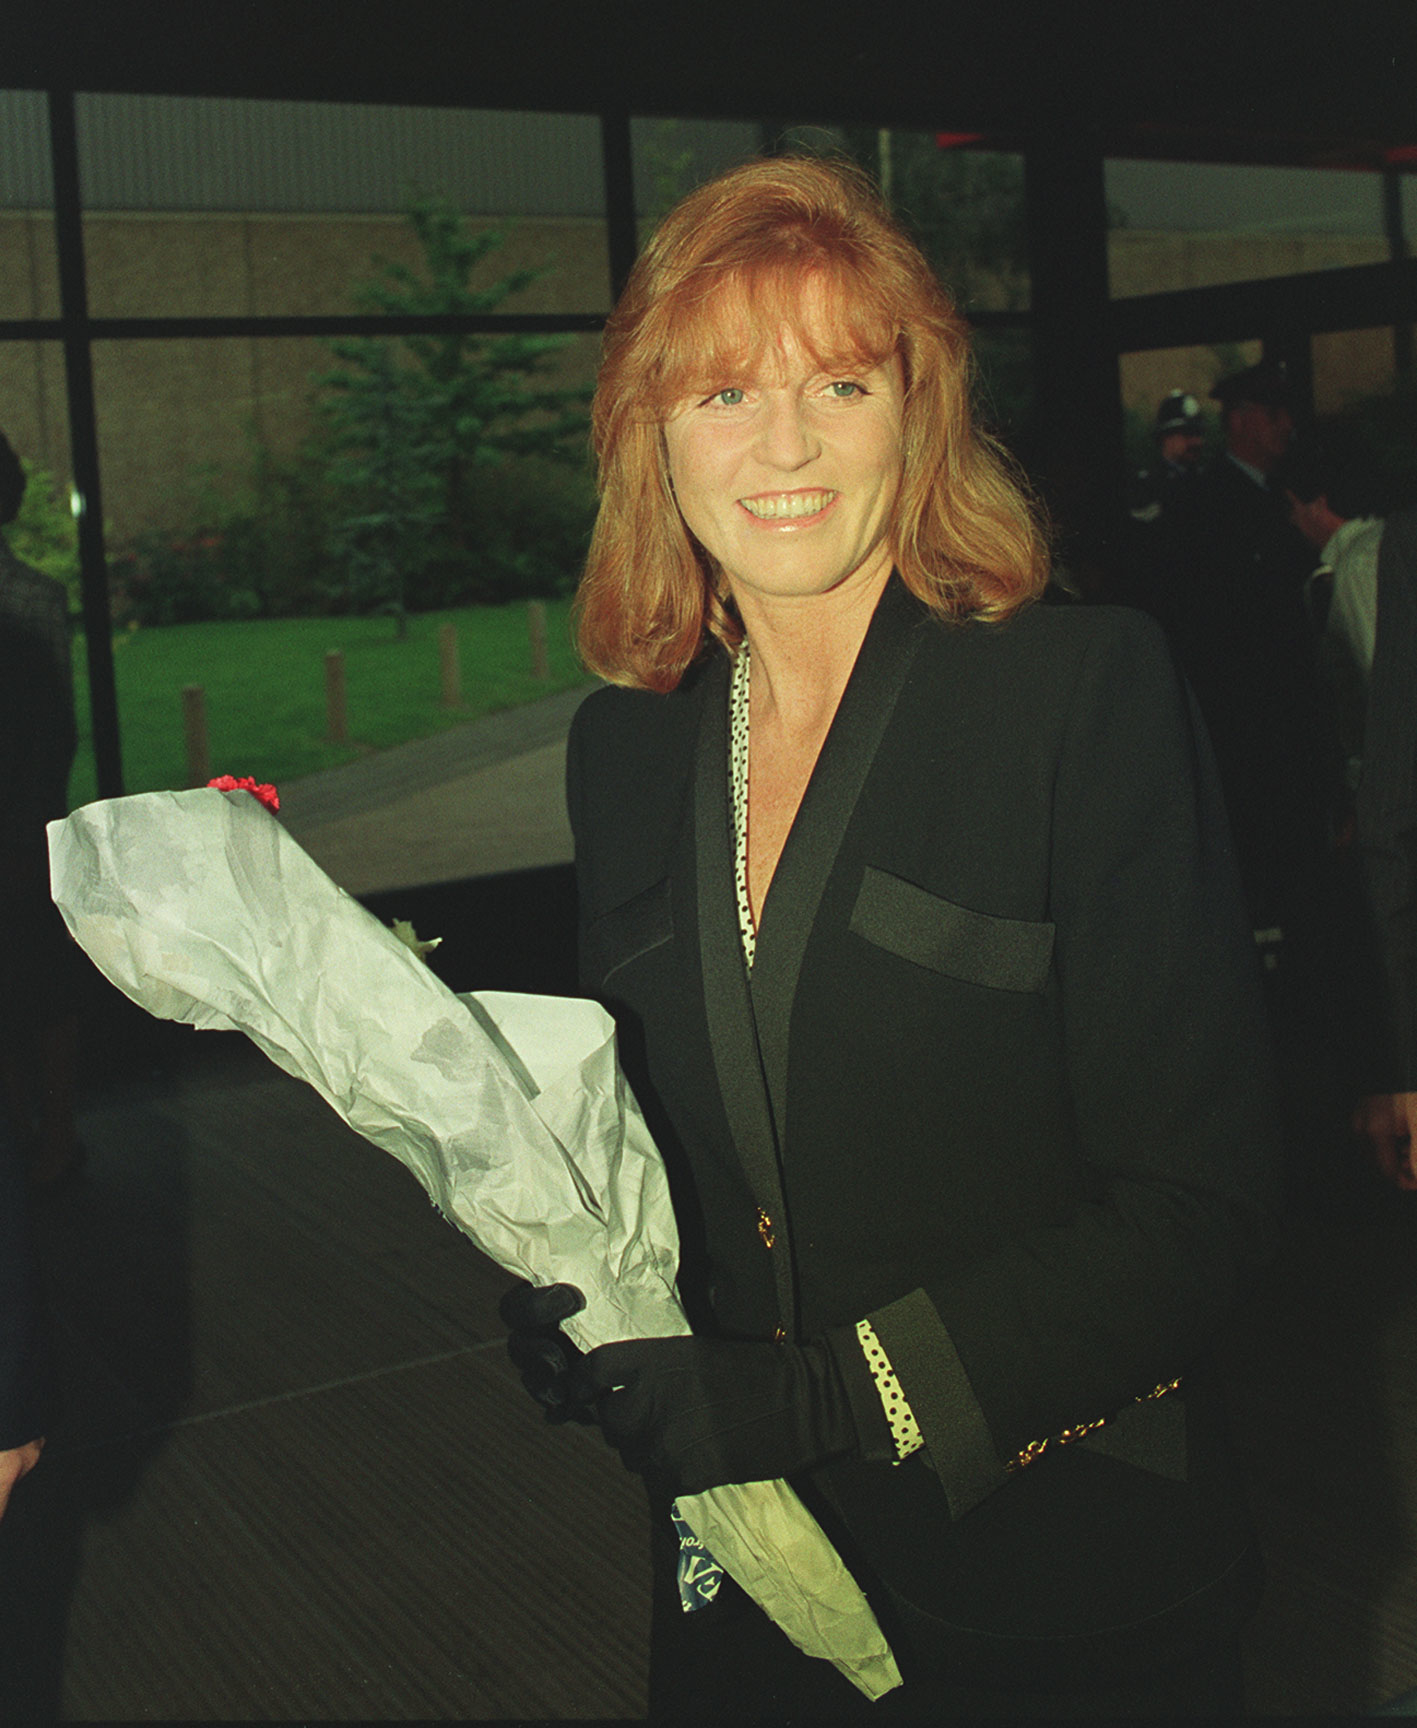 Sarah Ferguson in a black blazer, holding a bouquet, smiling at an event